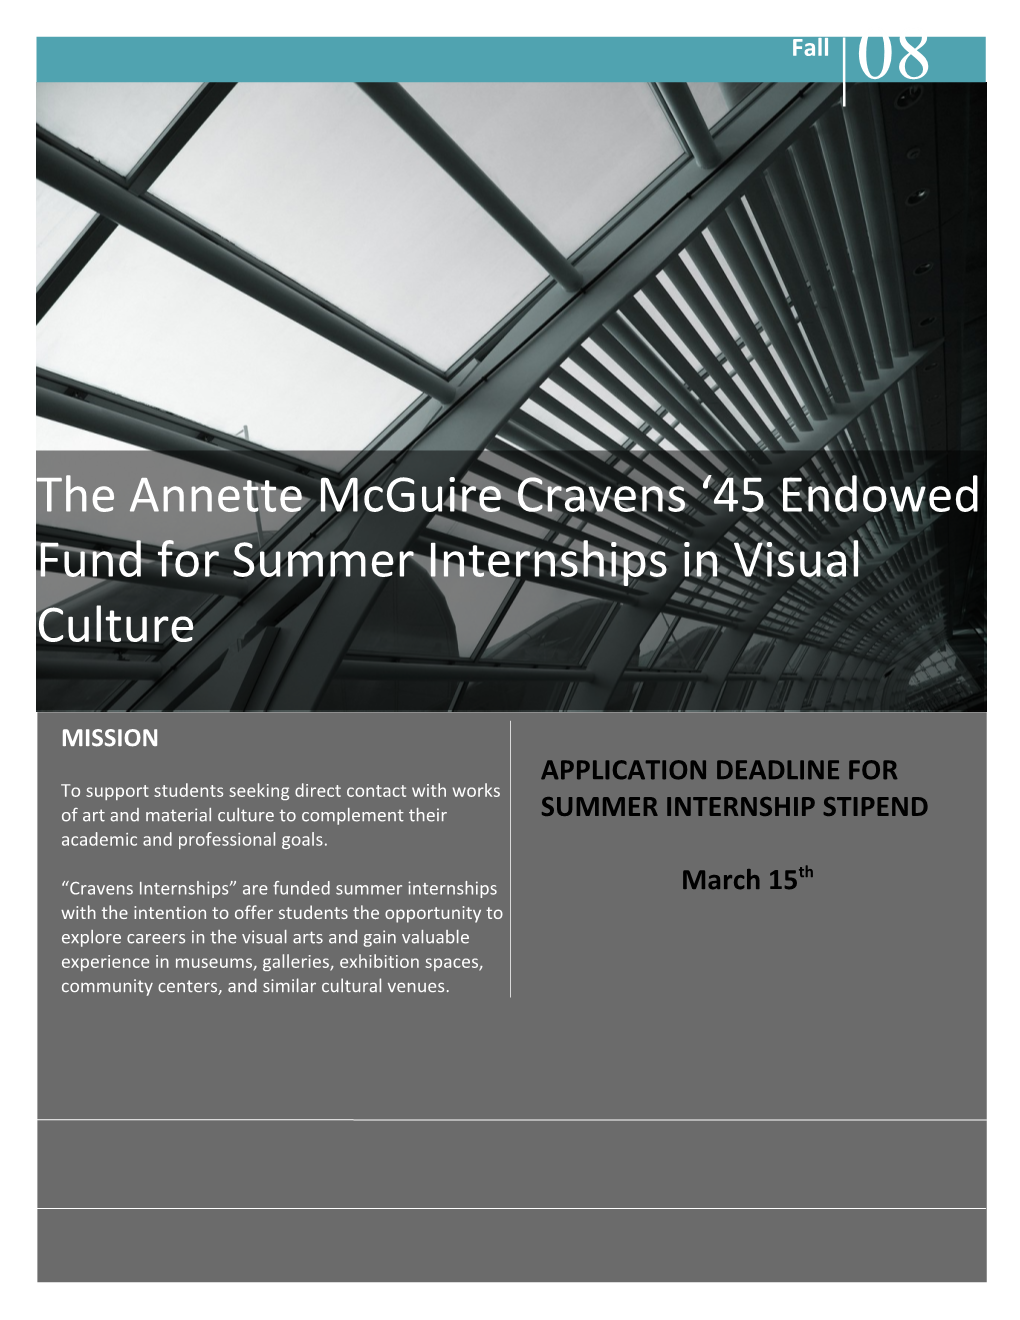 The Annette Mcguire Cravens 45 Endowed Fund for Summer Internships in Visual Culture